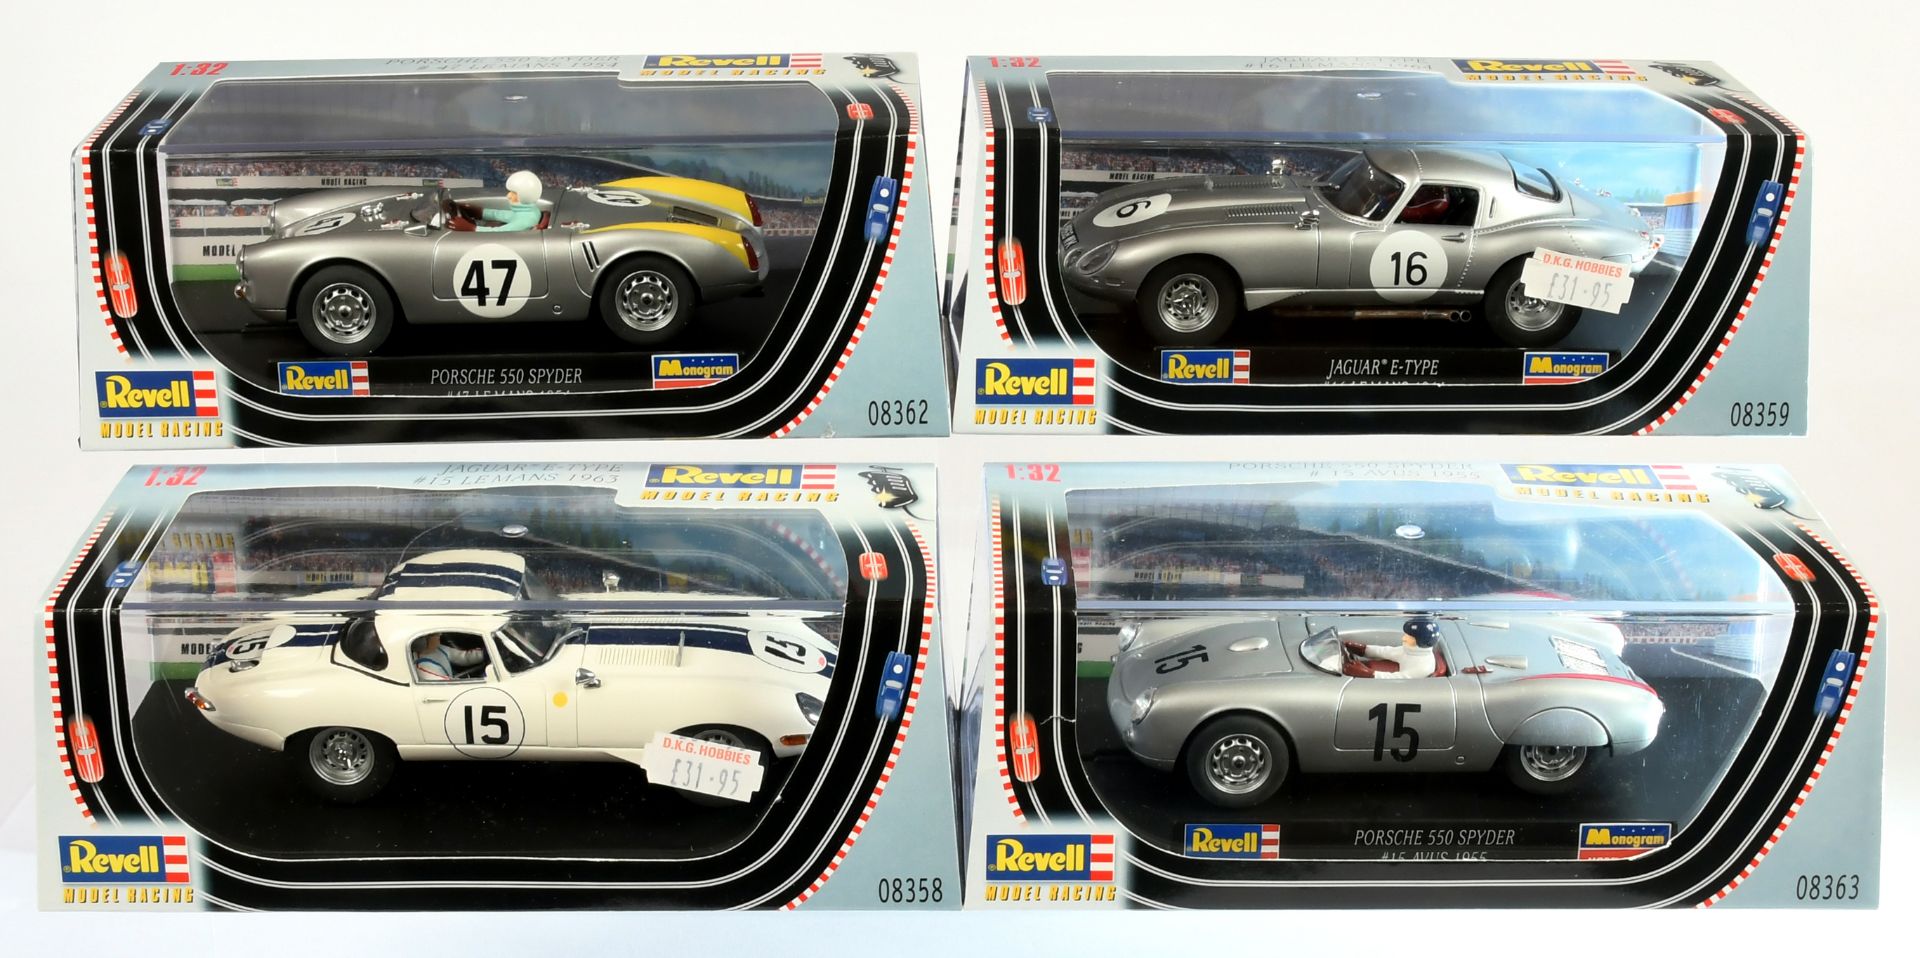 Revell Model Group of Racing Cars